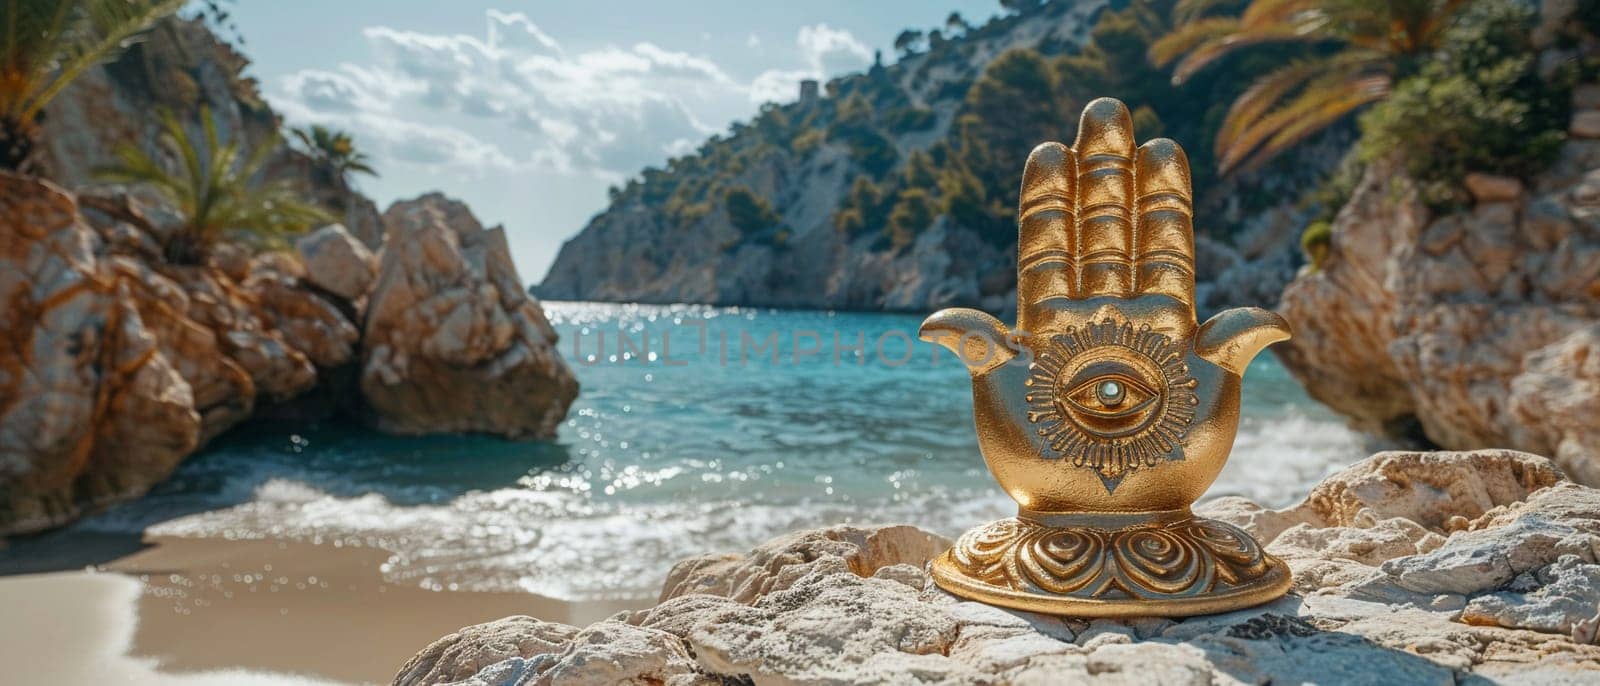 Hamsa Hand Amulets Overlooking a Mediterranean Seascape, The protective symbols blur with the sea, guarding against the evil eye.